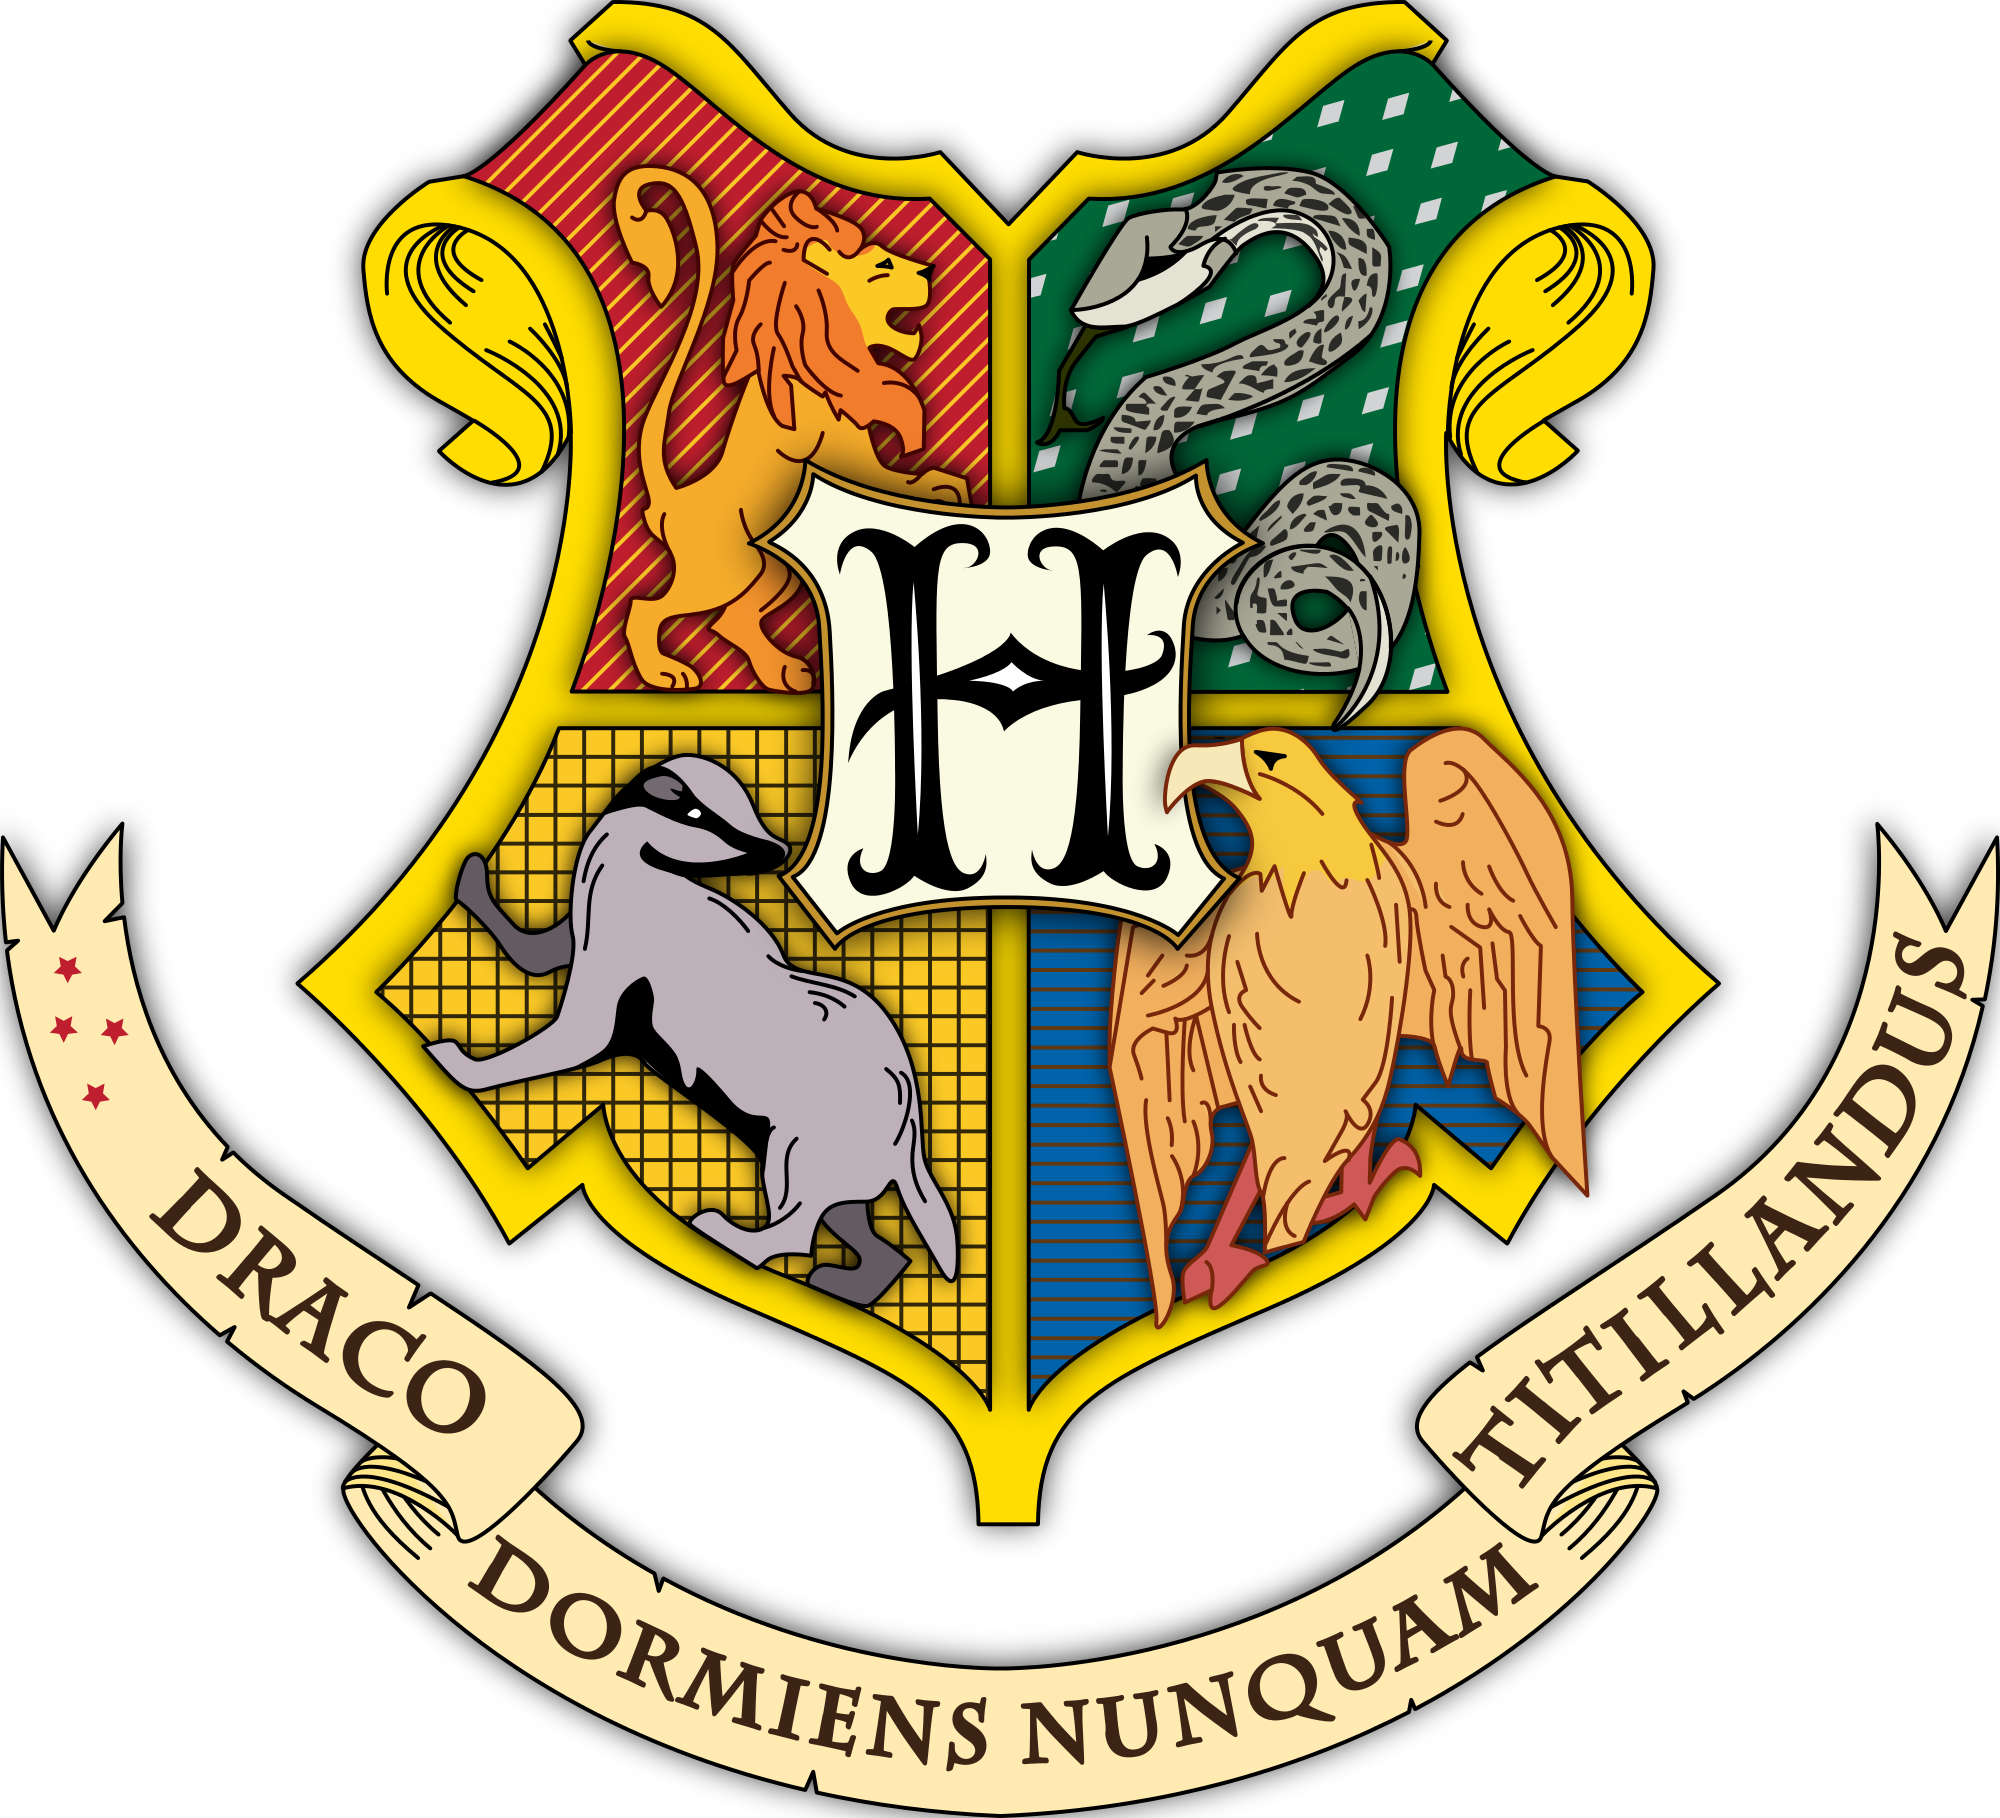 Which Hogwarts House does each Candidate’s Supporters Belong to? Wonk